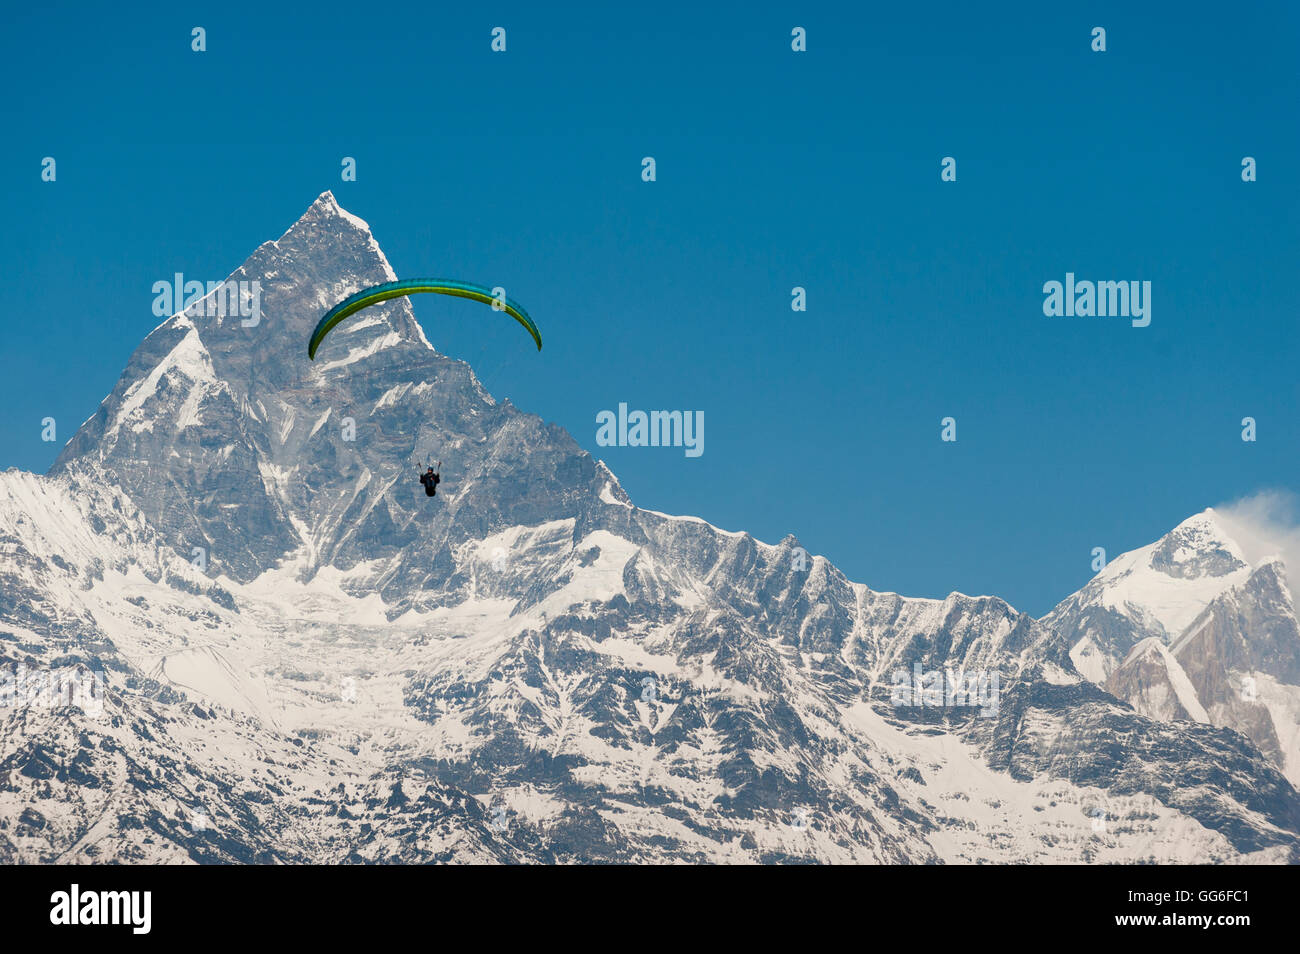 A paraglider hangs in the air with the dramatic peak of Machapuchare (Fishtail mountain) in the distance, Himalayas, Nepal, Asia Stock Photo